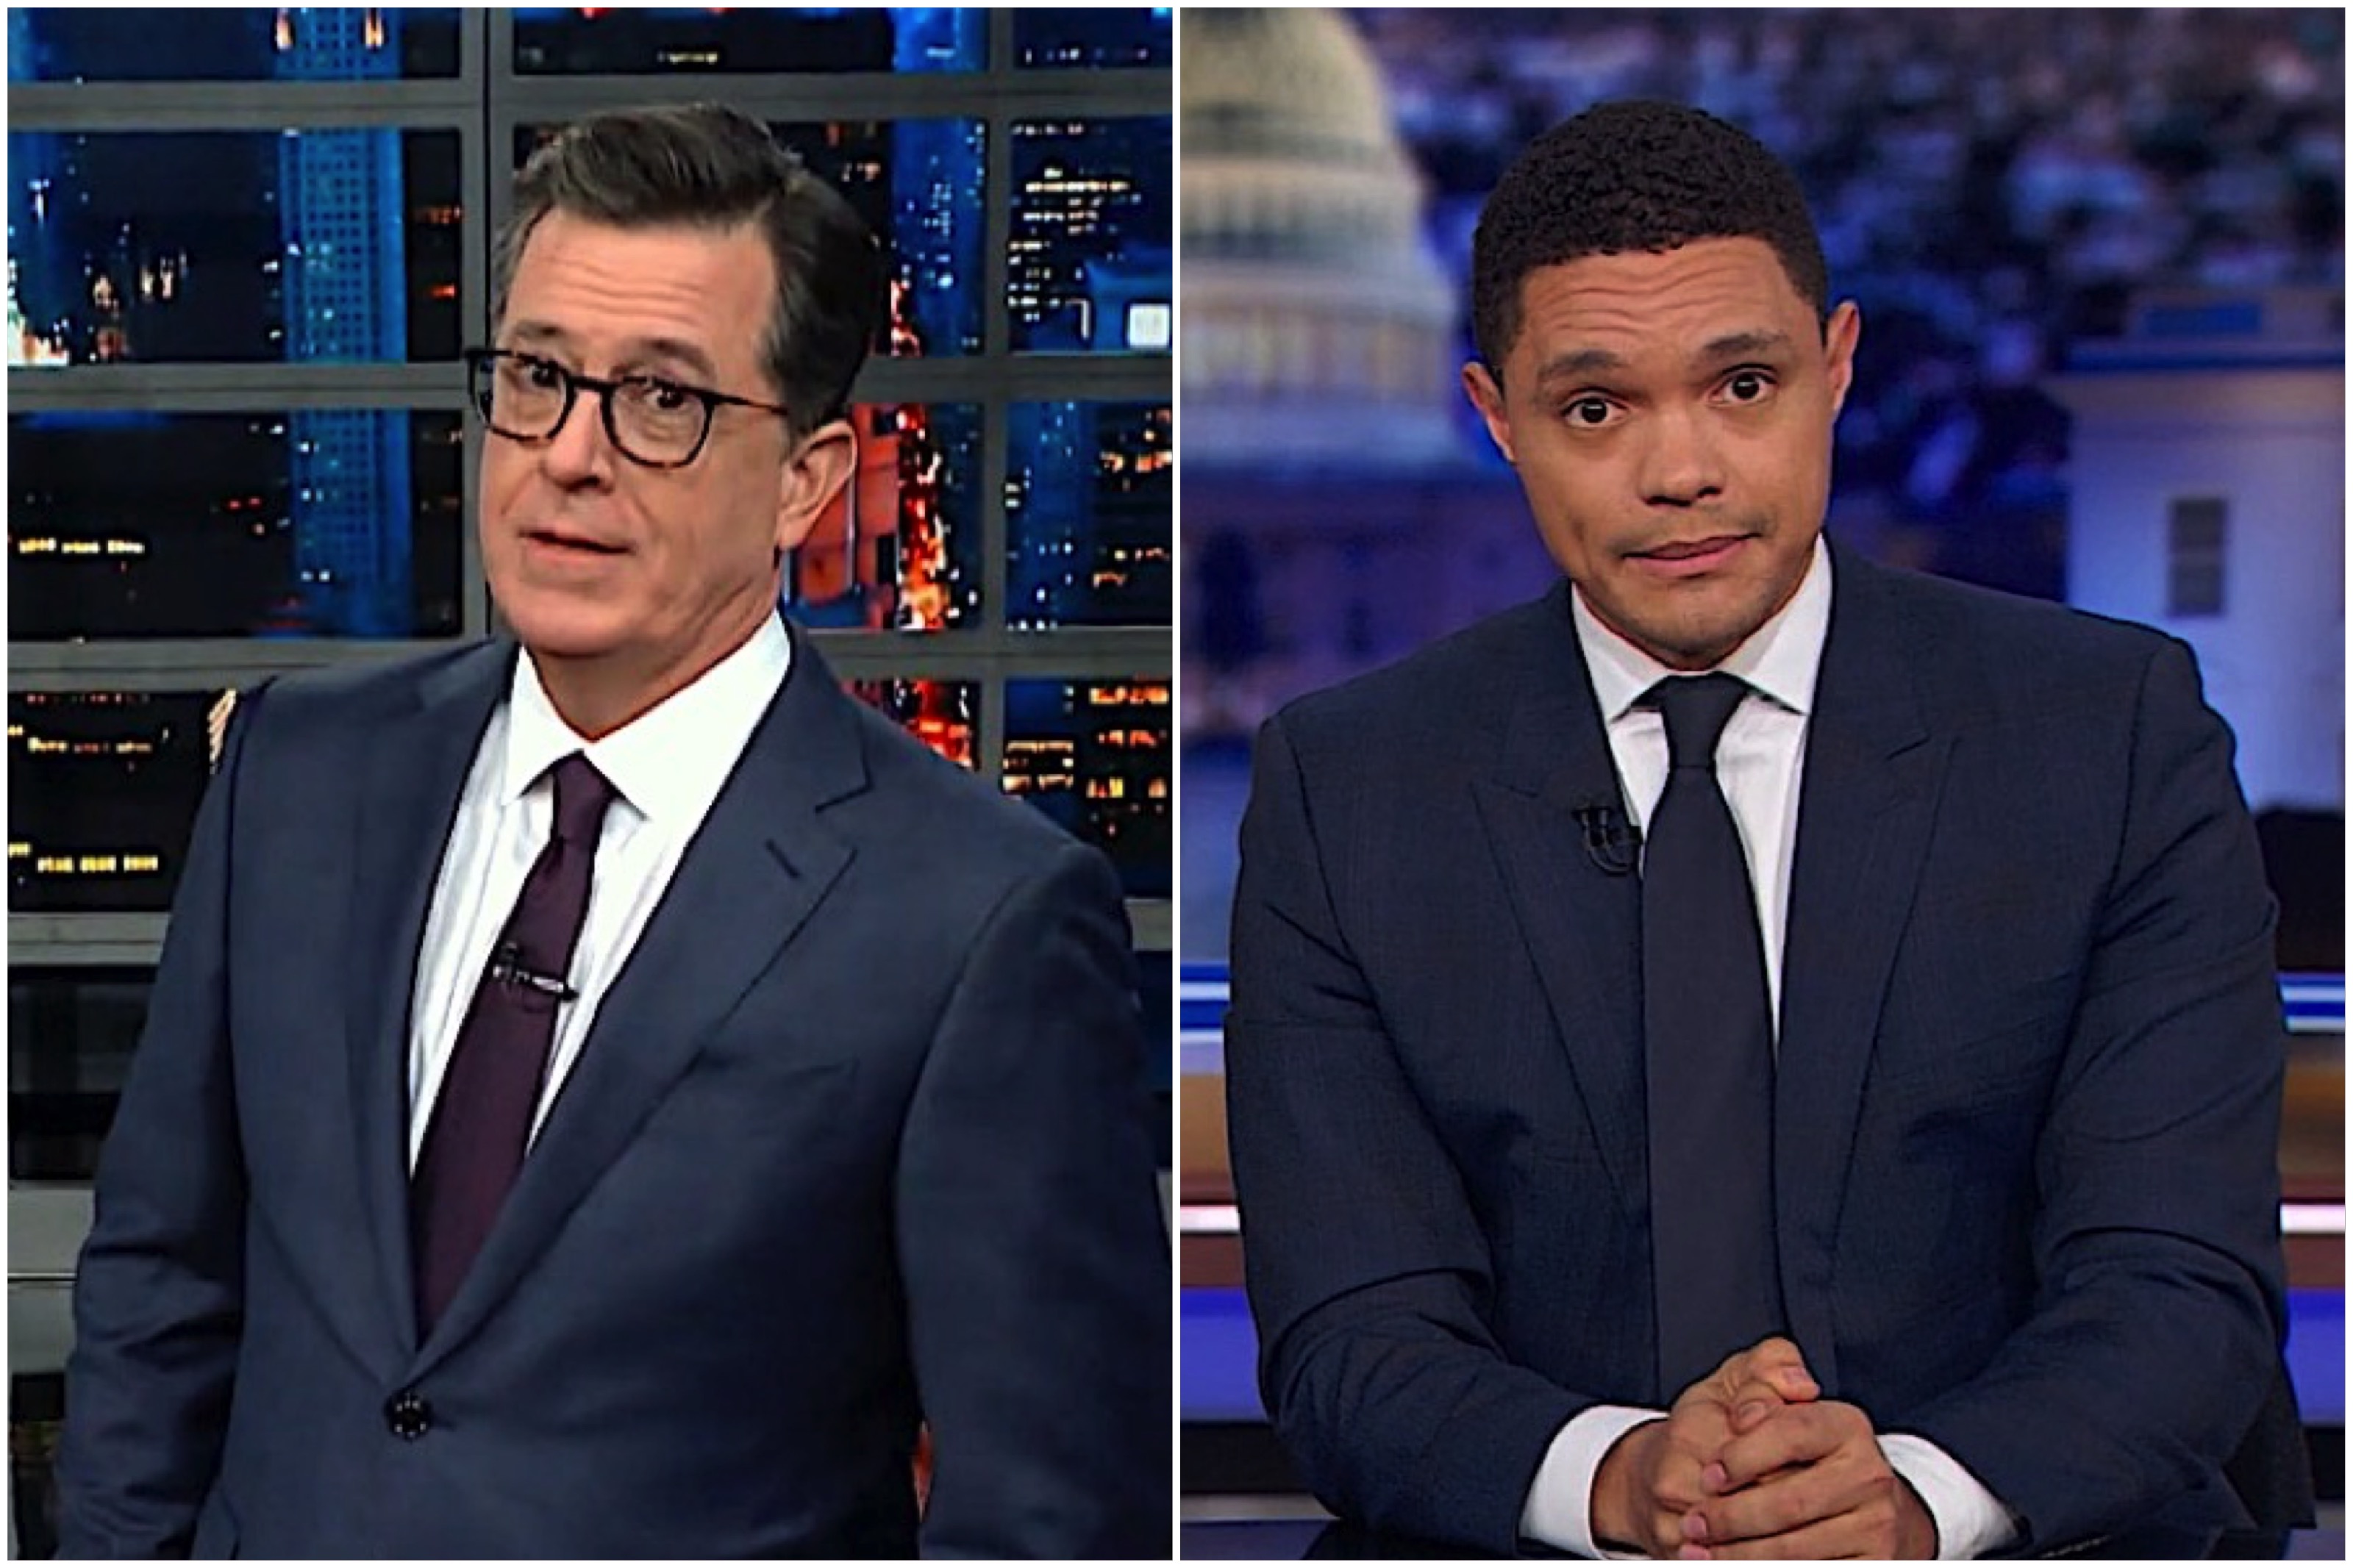 Trevor Noah and Stephen Colbert side with the U.S. intelligence chiefs over Trump